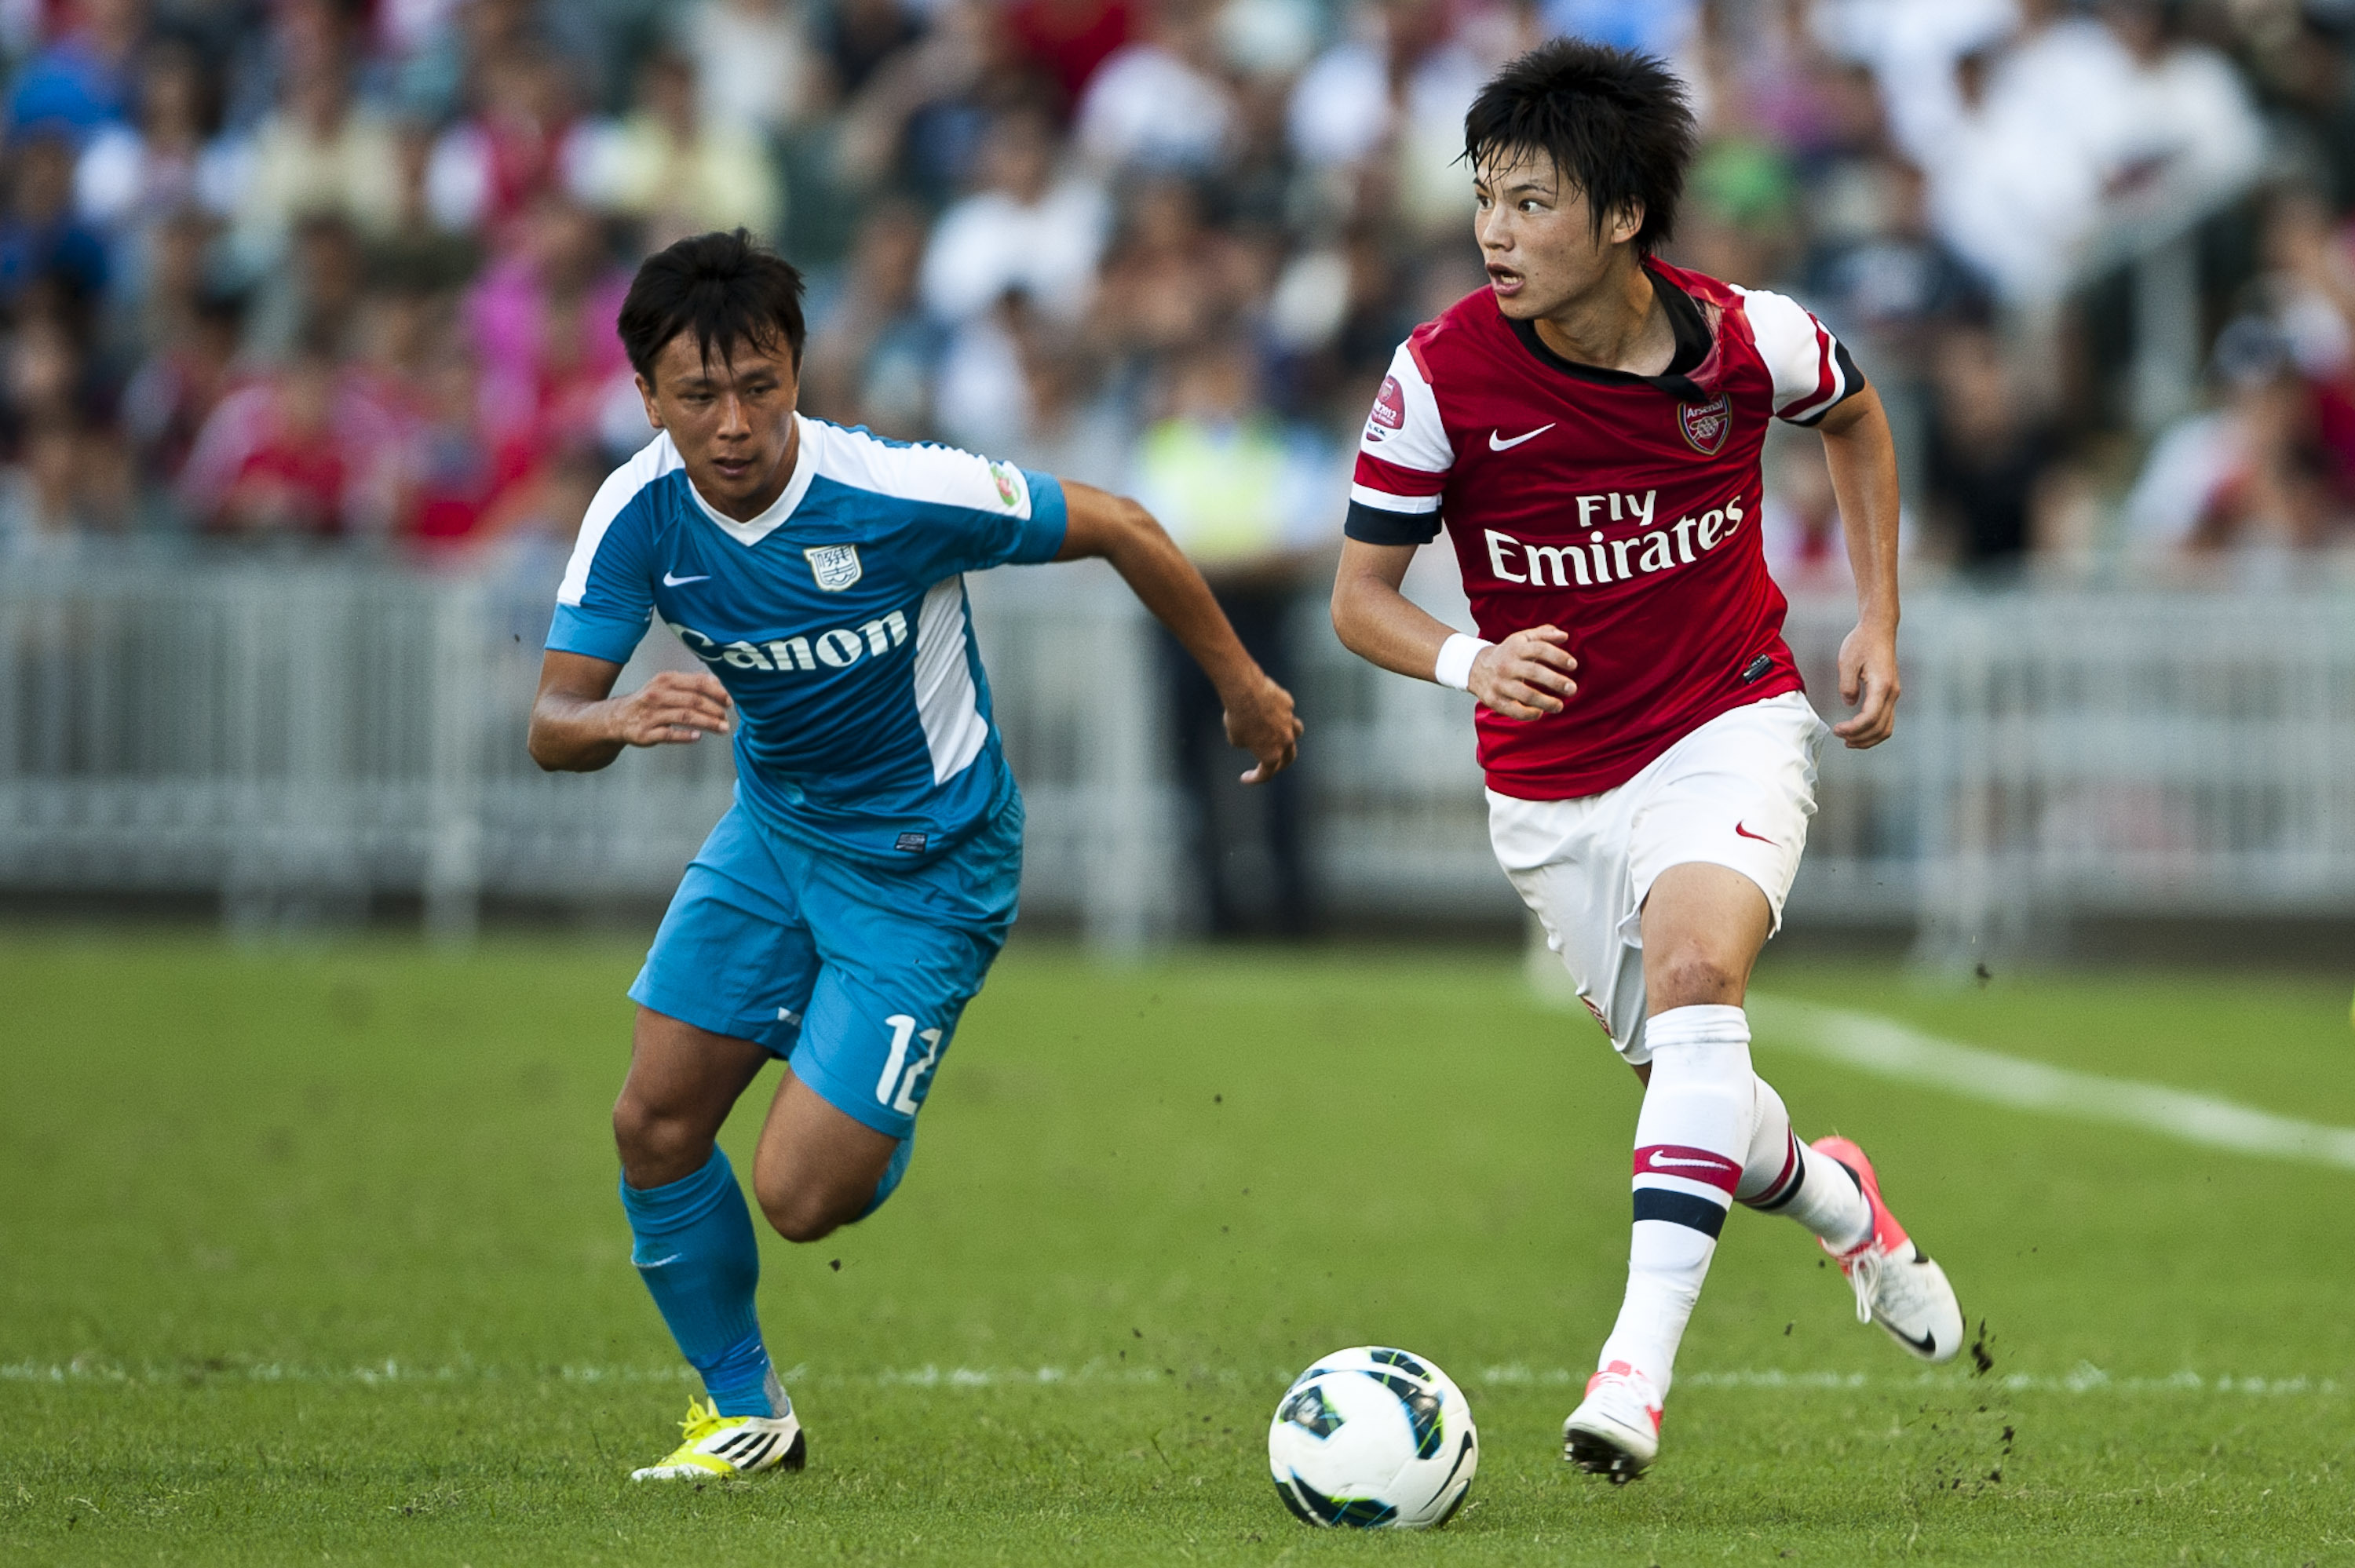 Arsenal FC: Why Ryo Miyaichi Faces an Uncertain Future with the Gunners | Bleacher Report | Latest News, Videos and Highlights